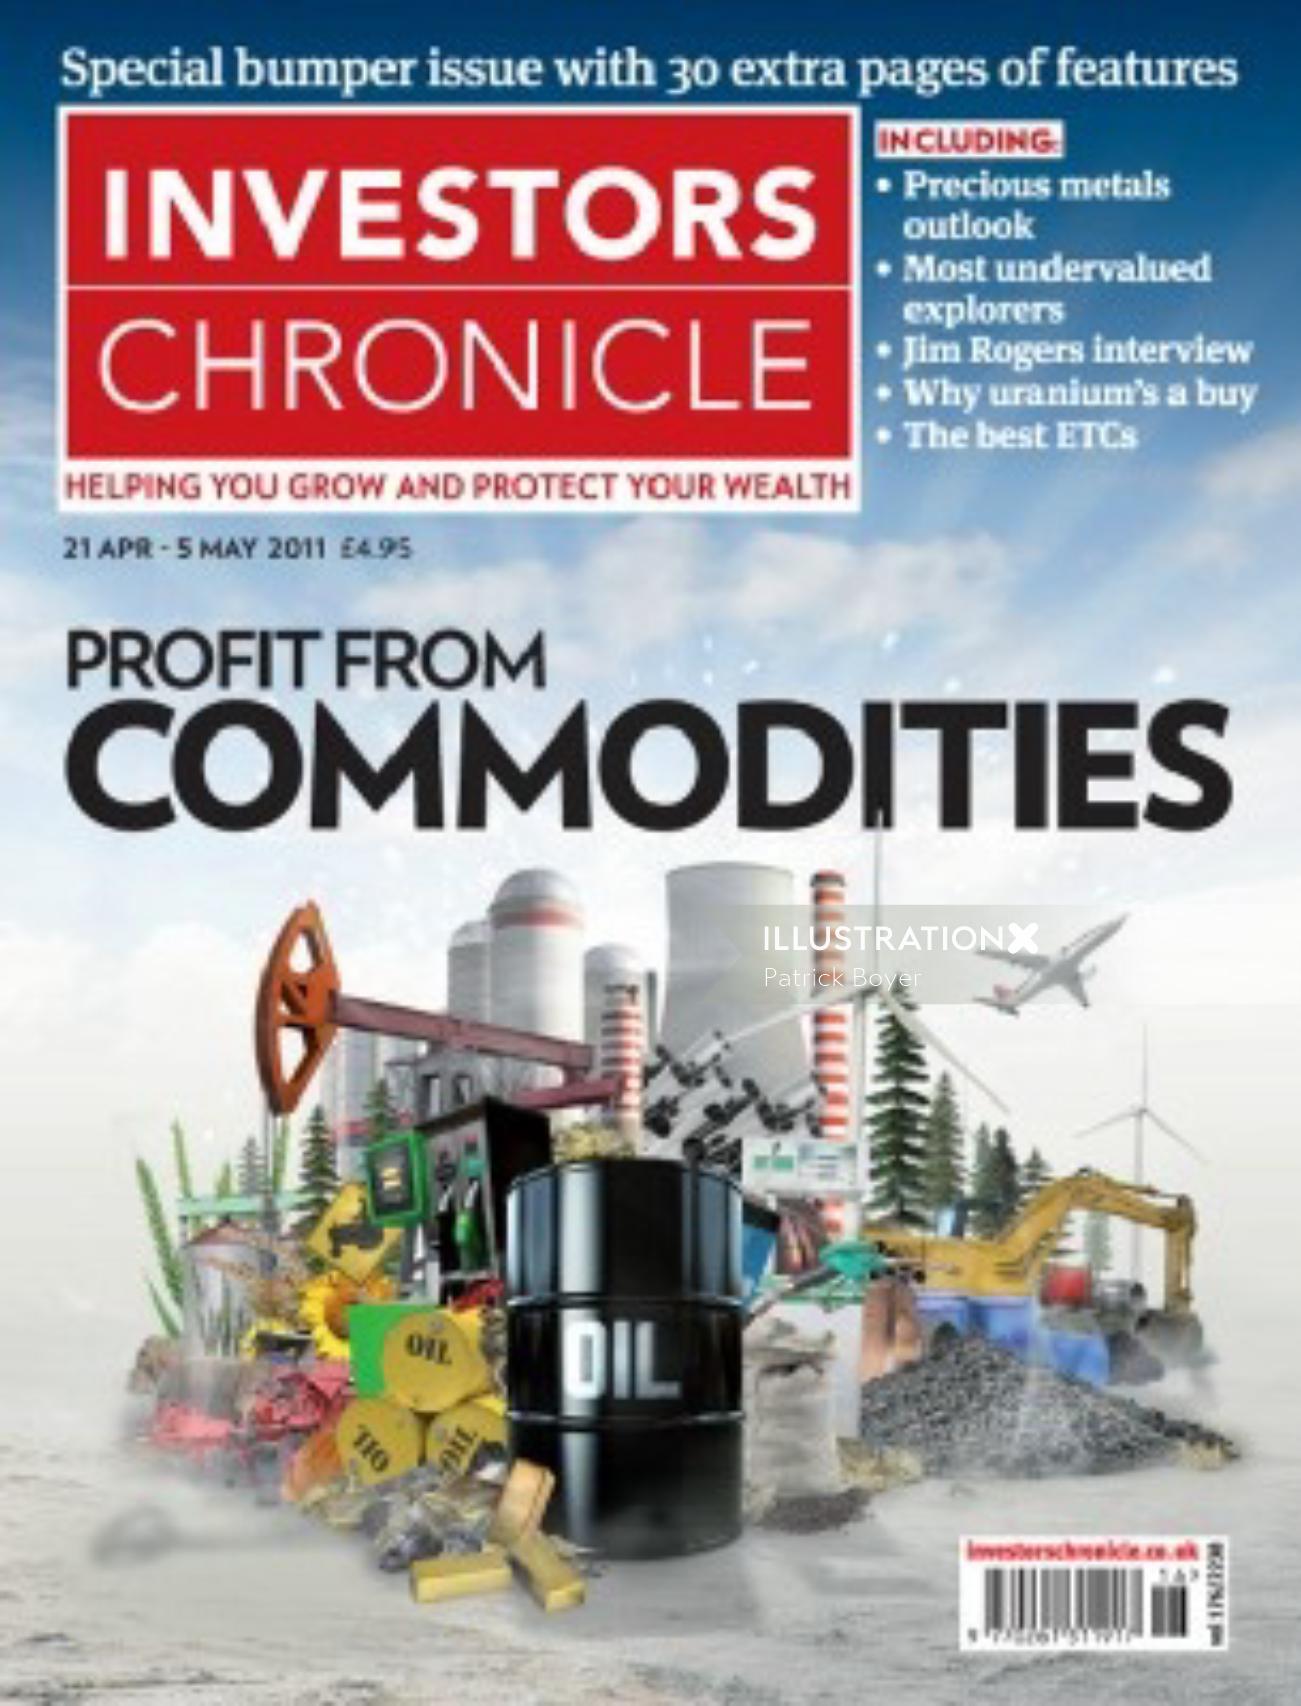 Magazine cover of investors chronicle - An illustration by Patrick Boyer